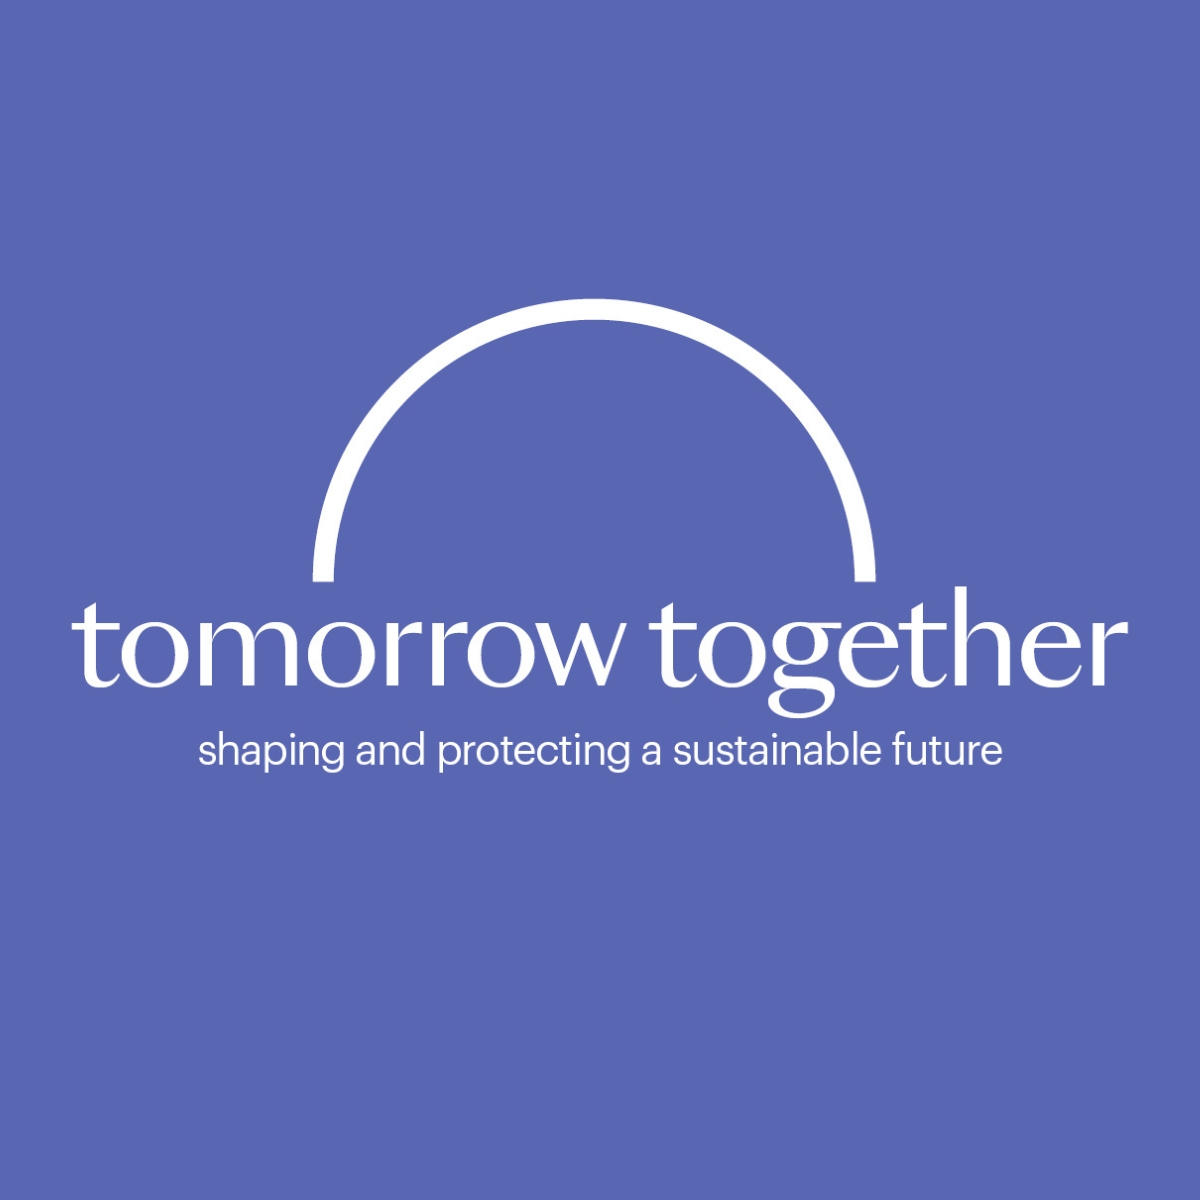 Our Tomorrow Together insights explore topics around social impact, good governance, future building and investment & philanthropy. Explore the hub here: sustainability.farrer.co.uk #esg #sustainability #socialimpact